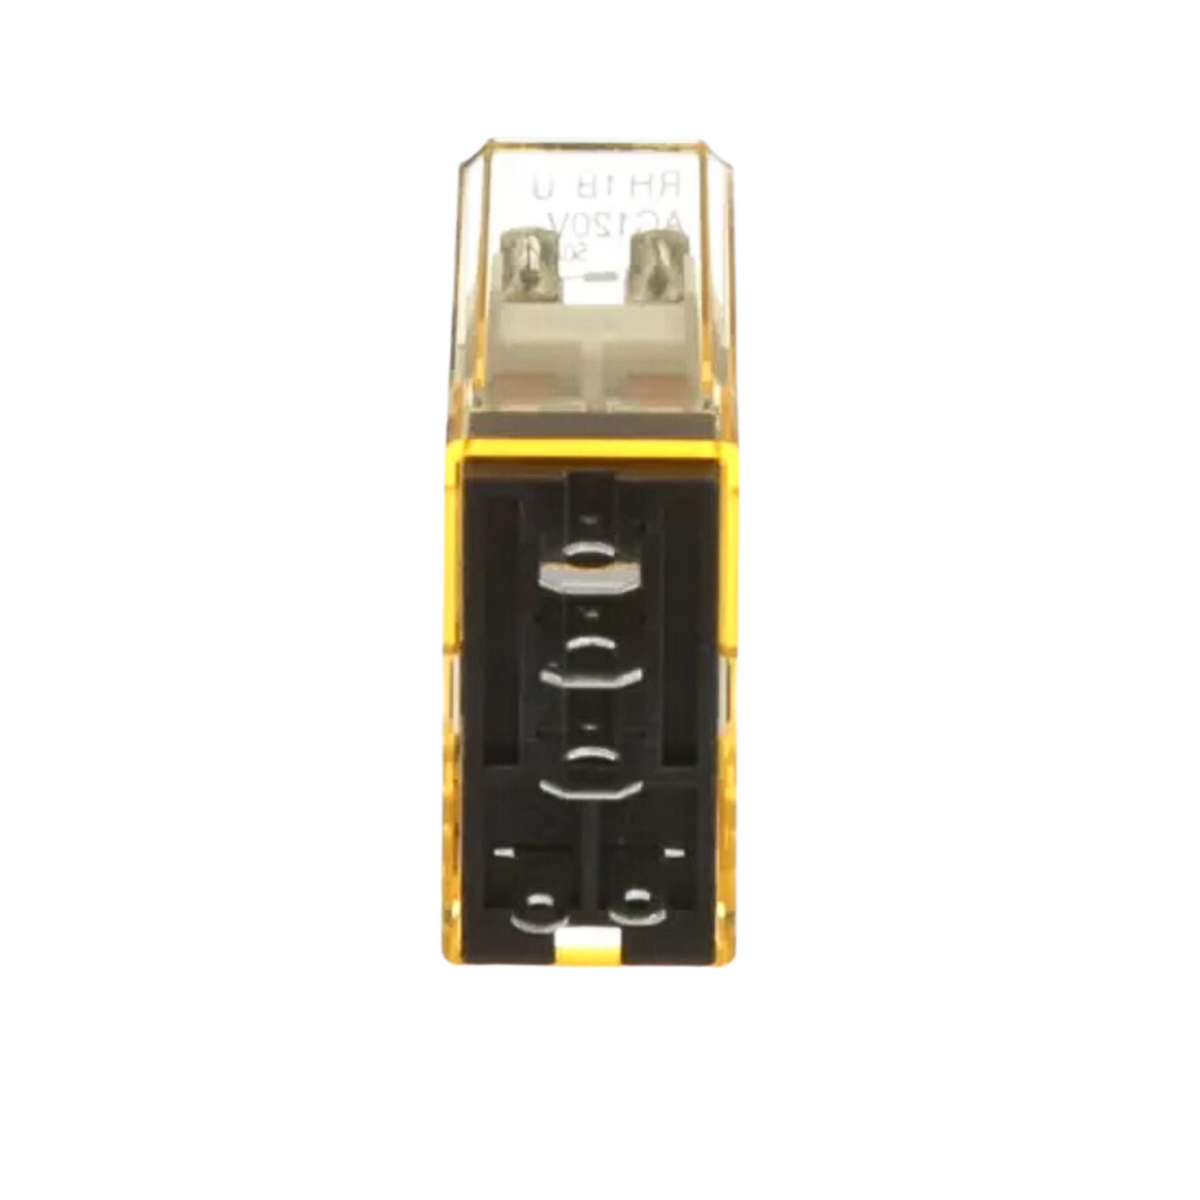 Plug-In Relay | RH1B-UAC120V used on Idec product line - back view